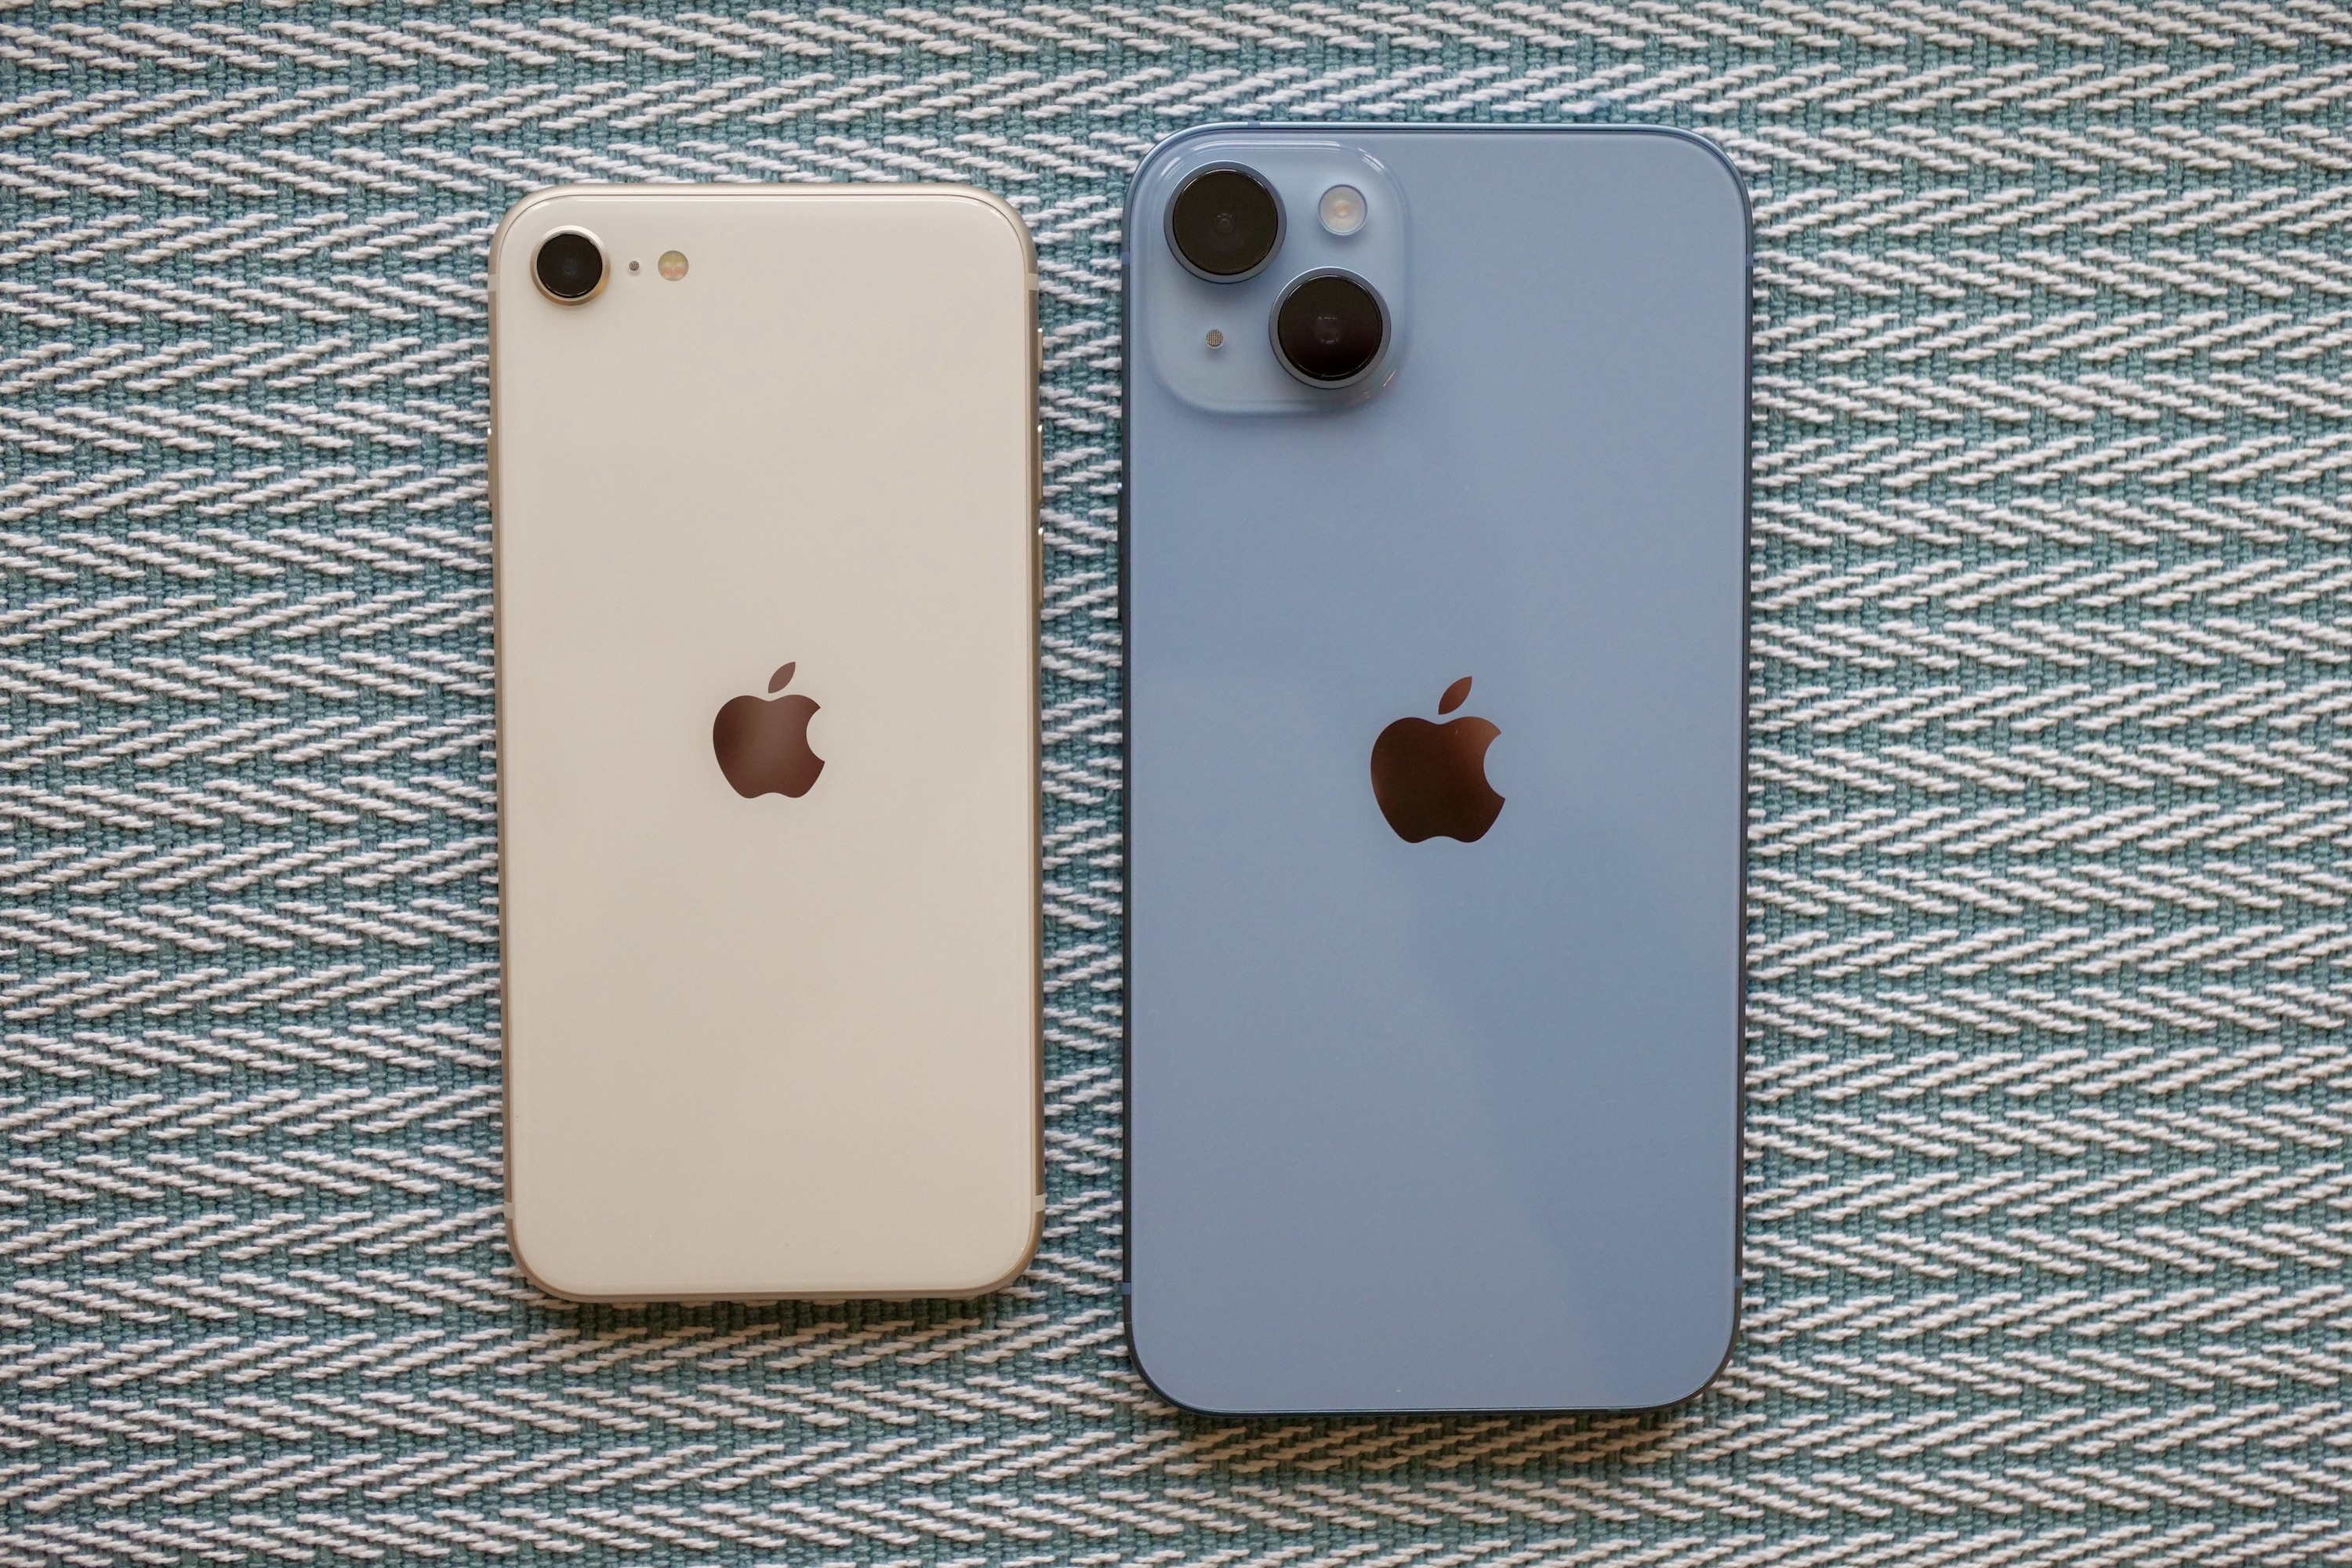 iPhone SE (2022) vs iPhone SE (2020): Here are the biggest differences